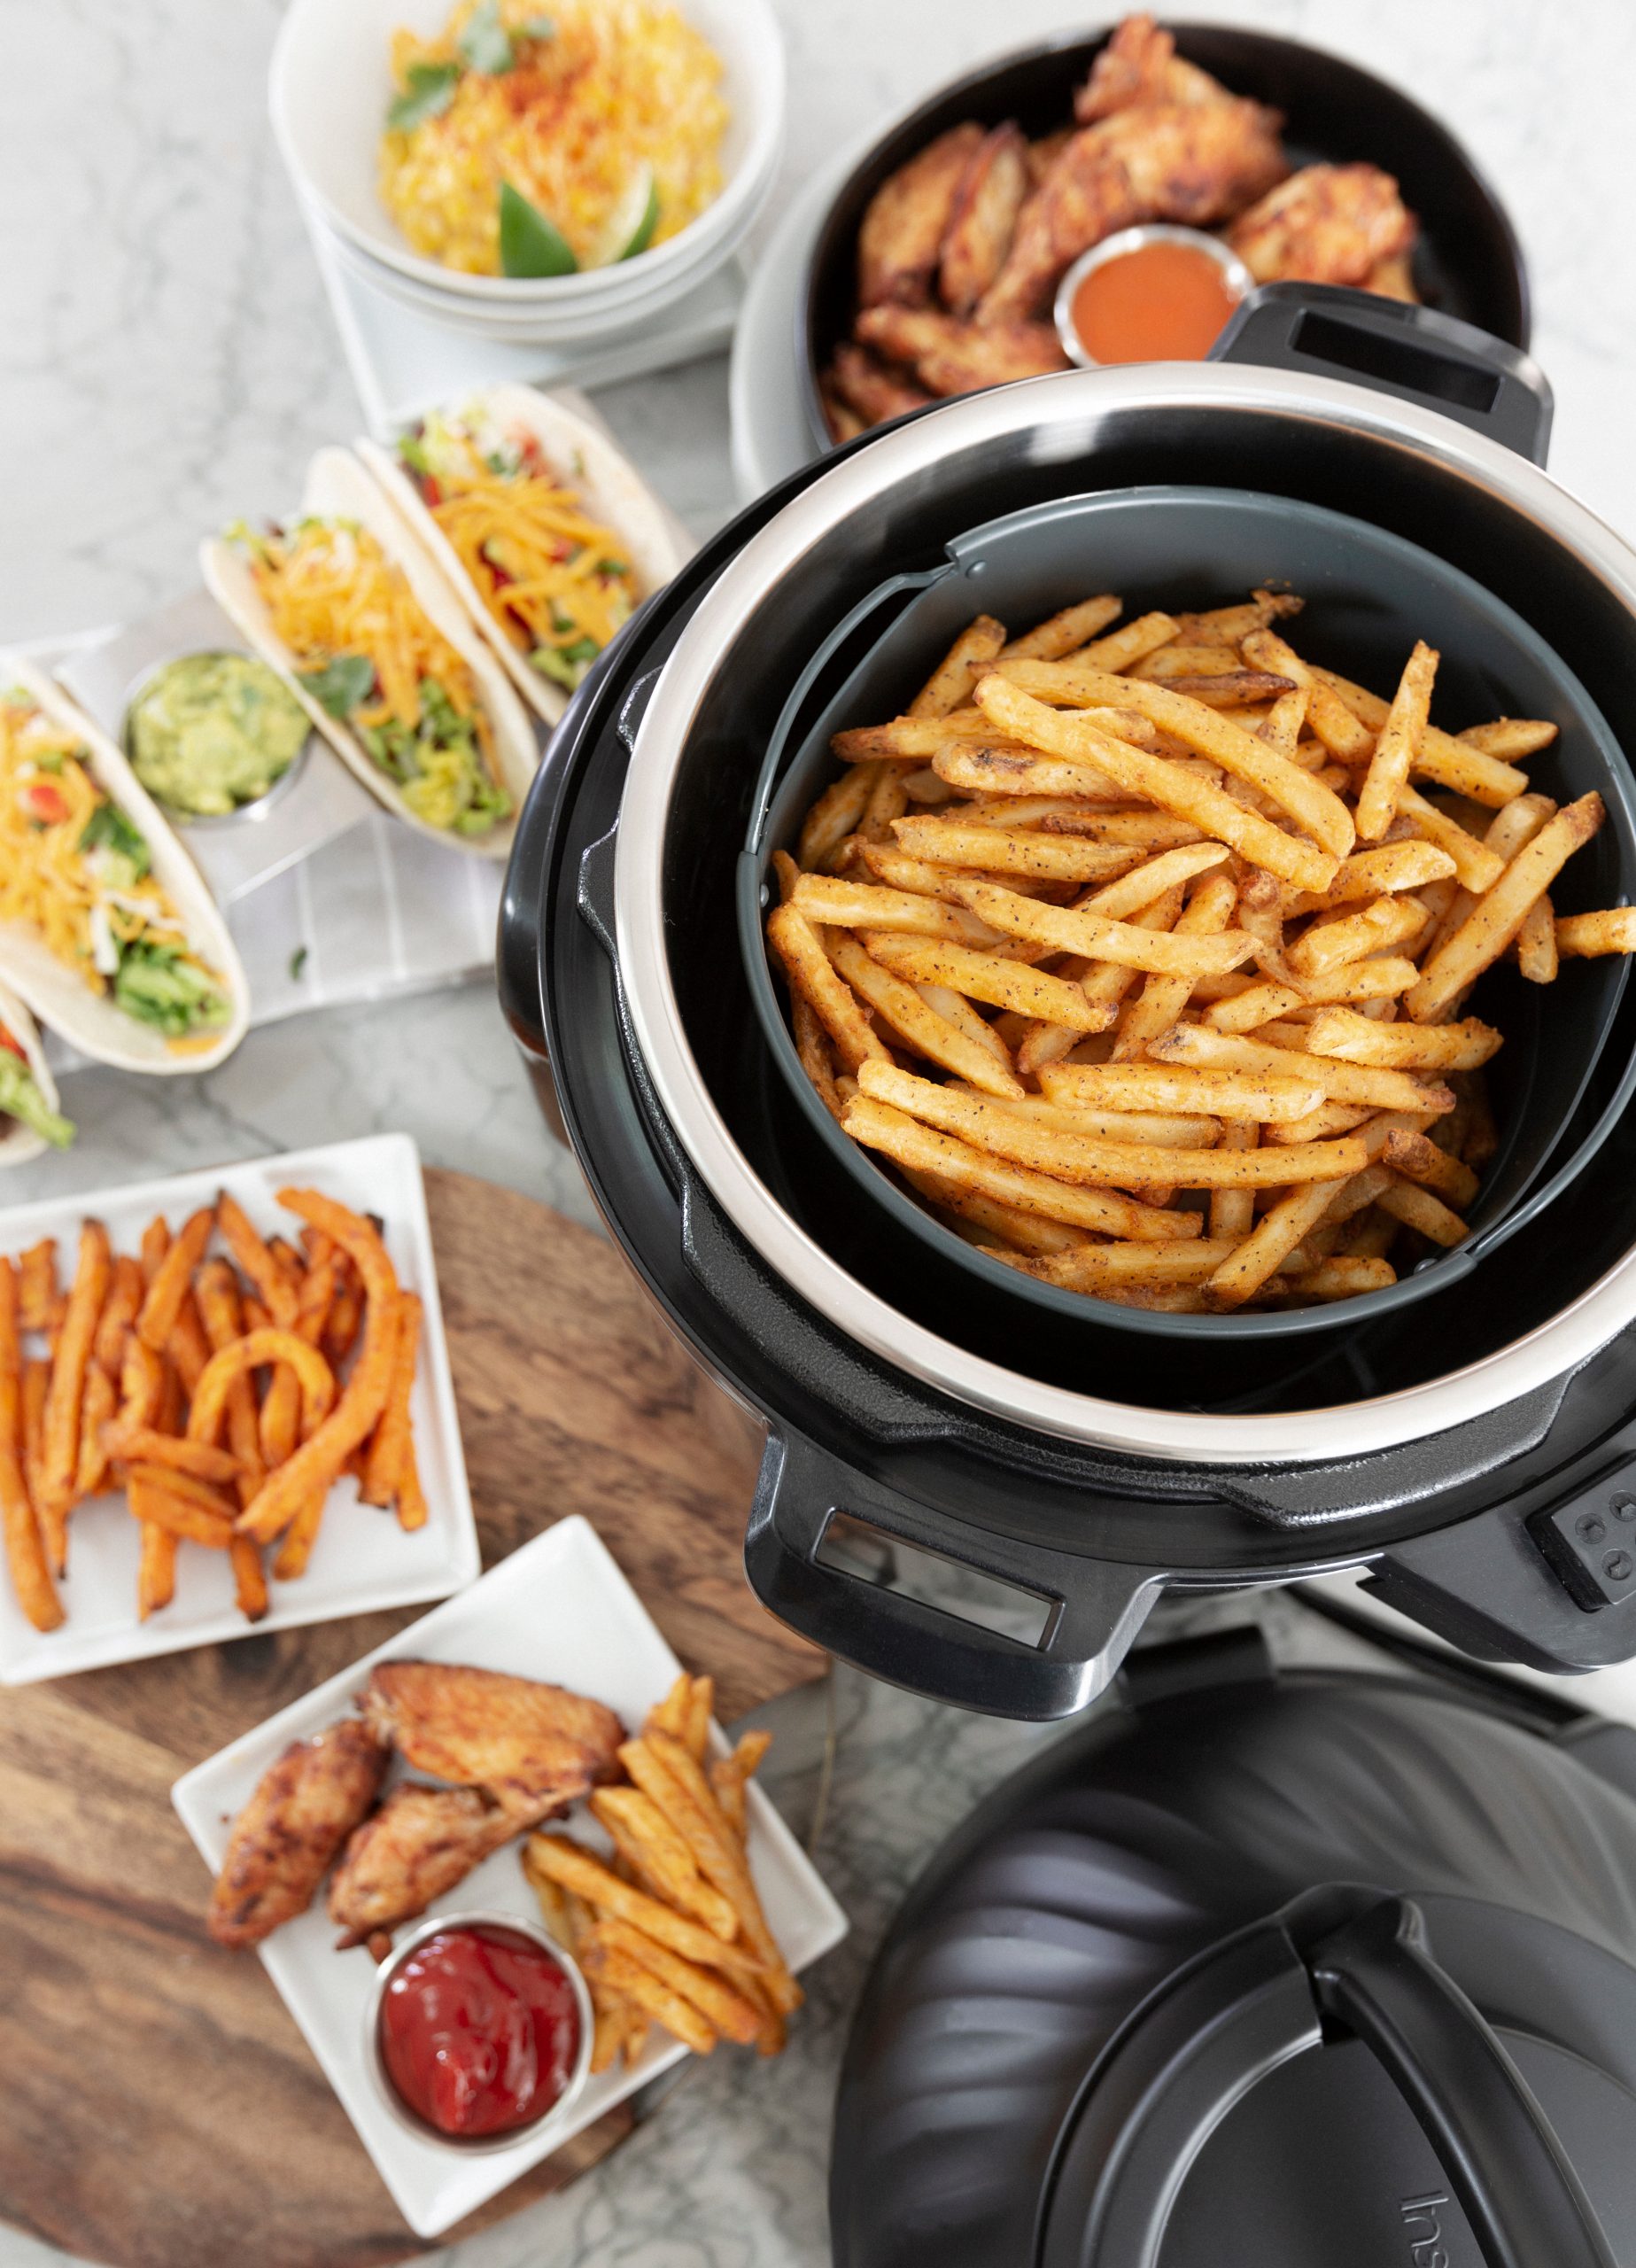 The Instant Pot now boasts an air fryer, but is it any good? We tried it